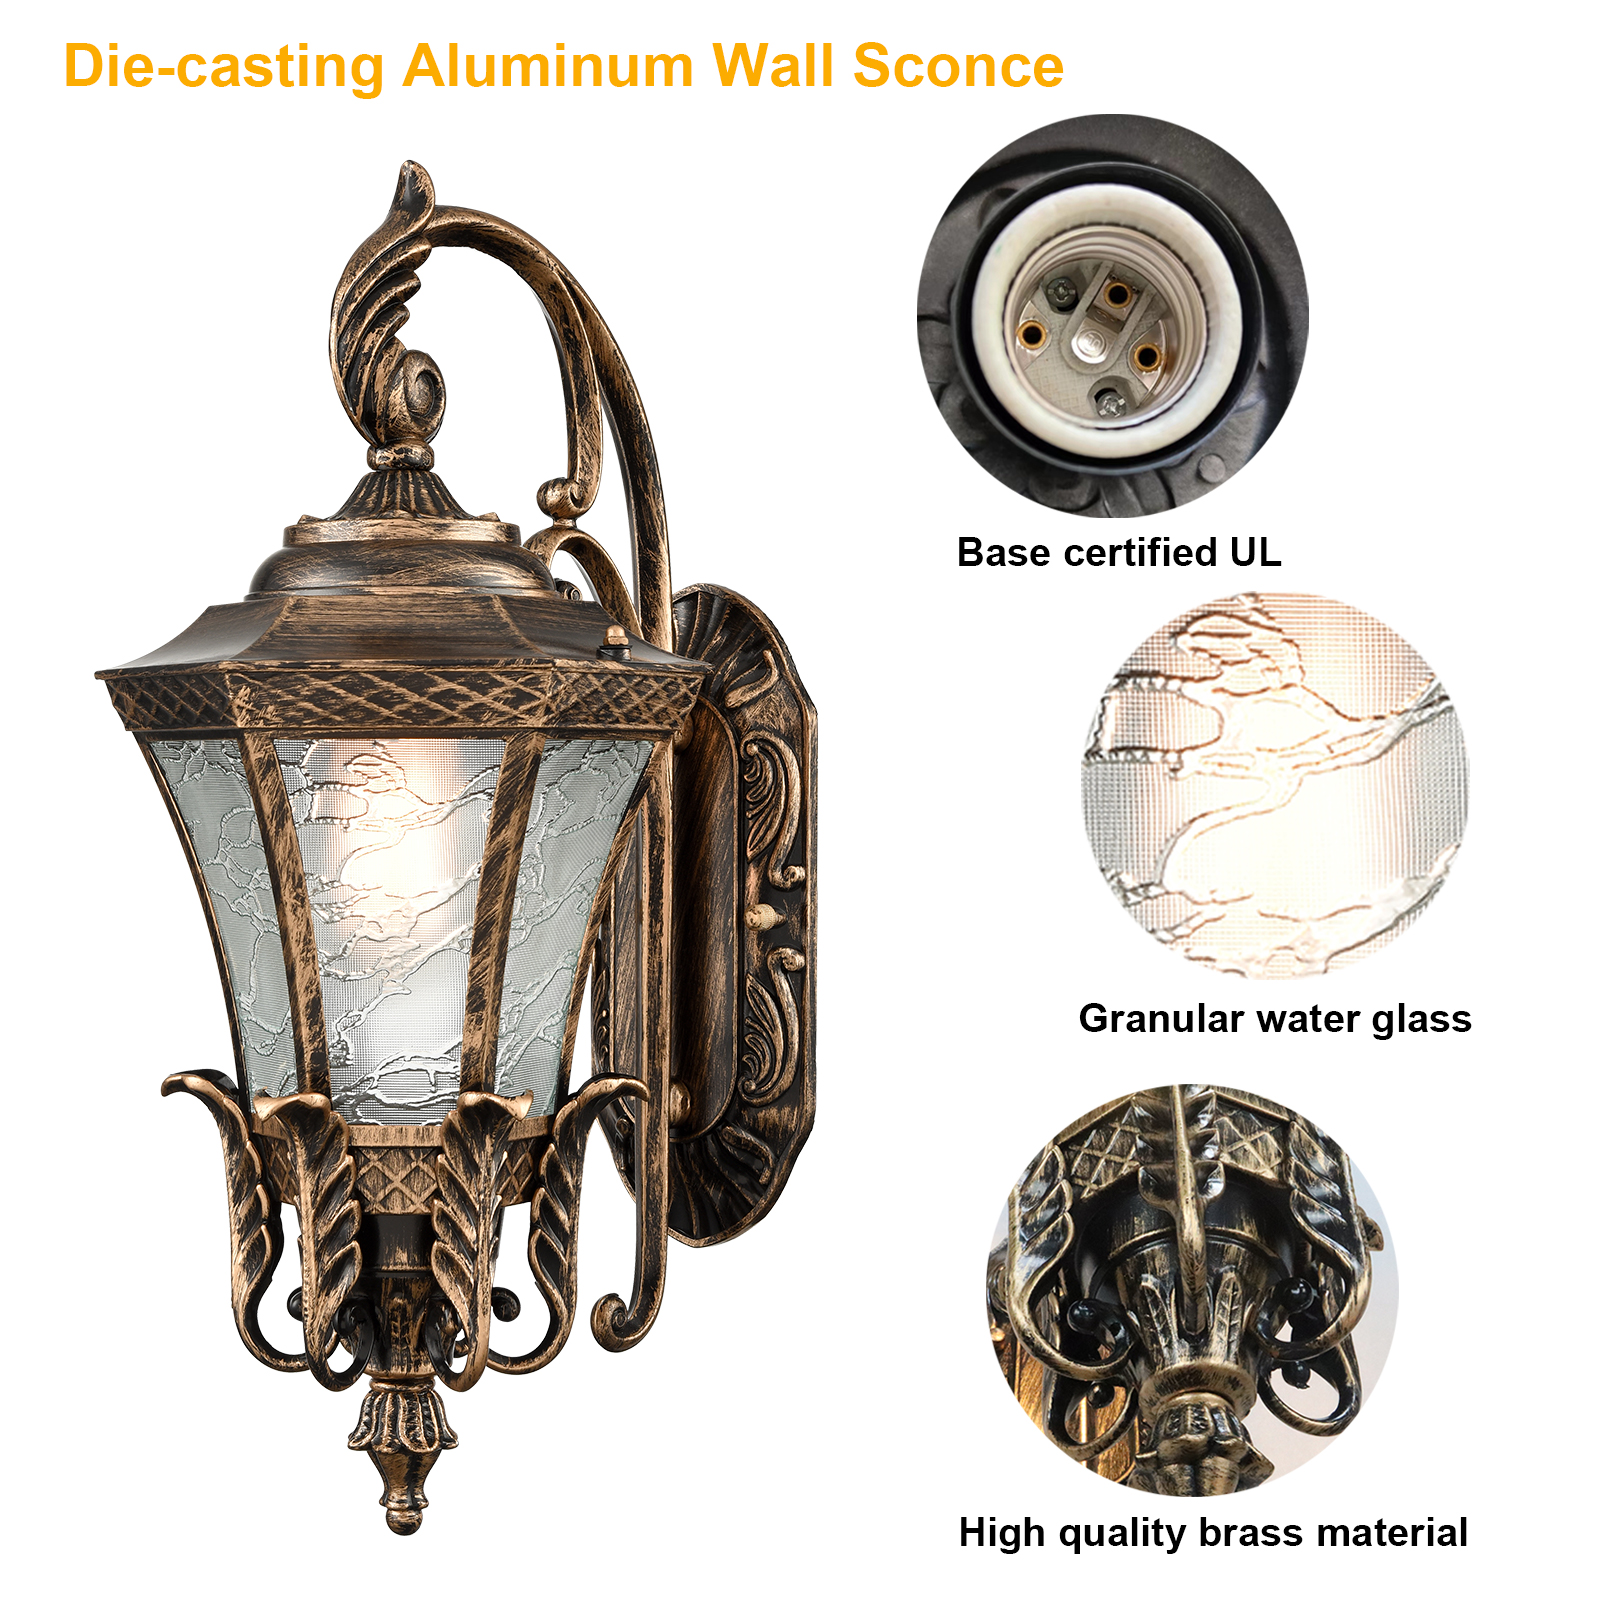 Black and Gold Sconces Wall Lighting 20.87" H Exterior Wall Light Fixture Waterproof Aluminium with Glass Outdoor Lanterns